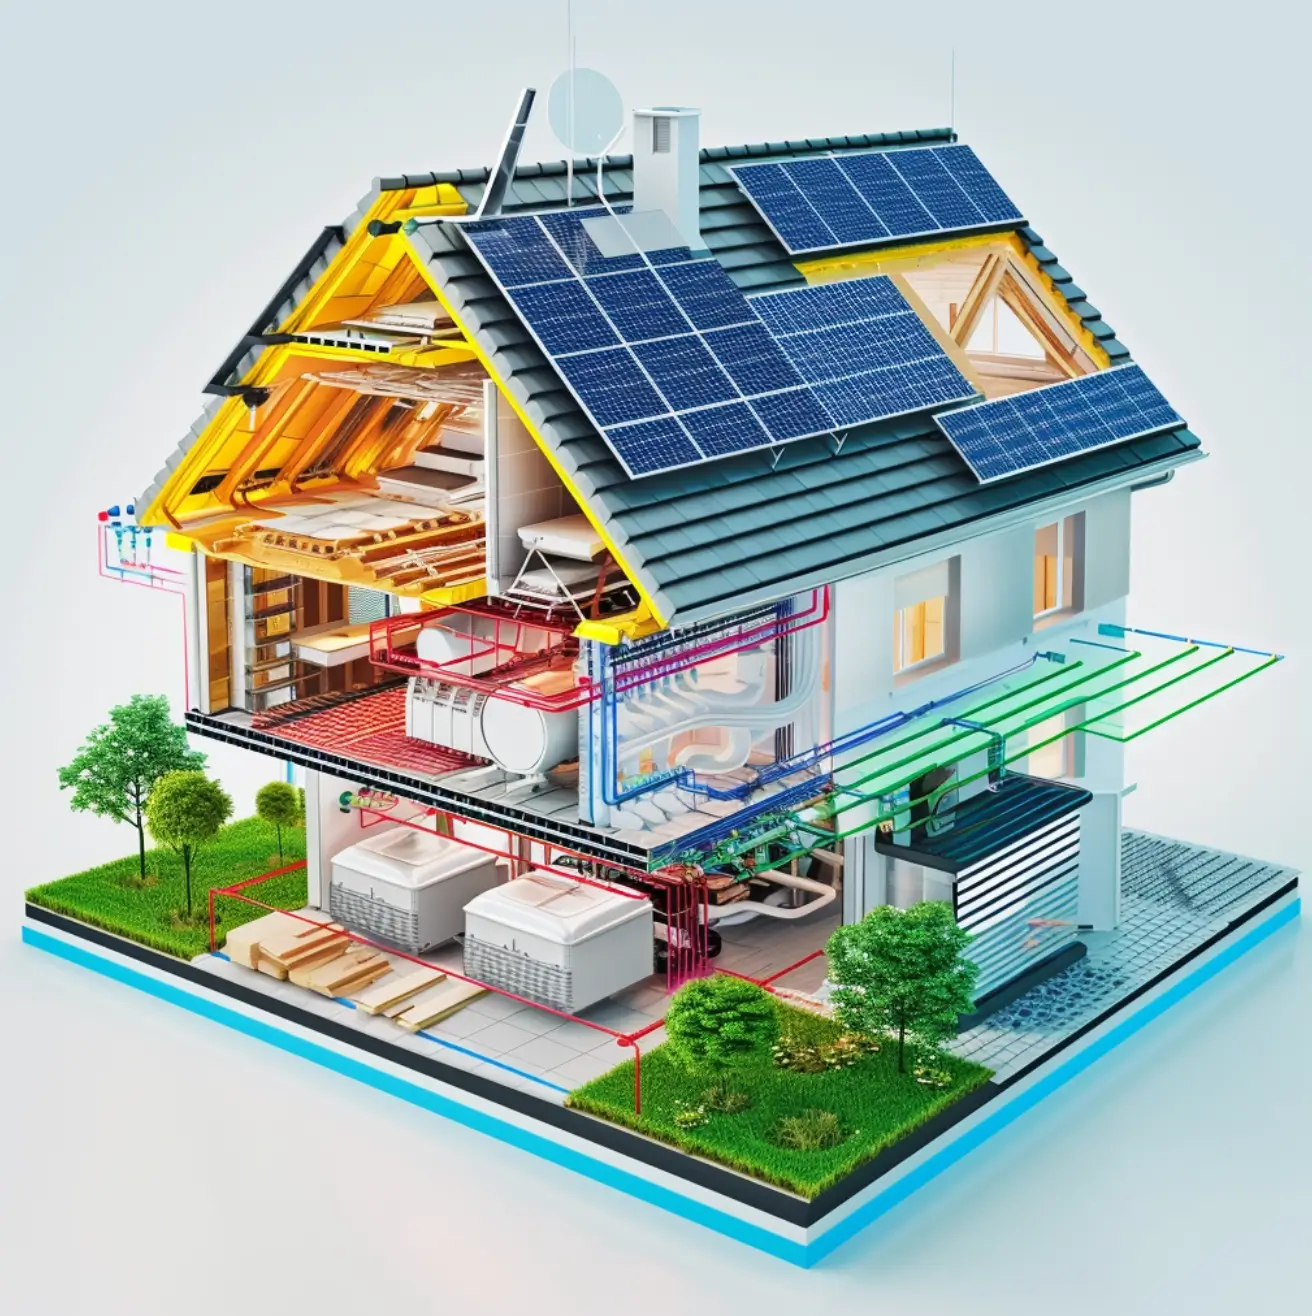 An AI image of an open house with three stories and wires going from place to place showing how batteries and solar panels give power to all devices in a house